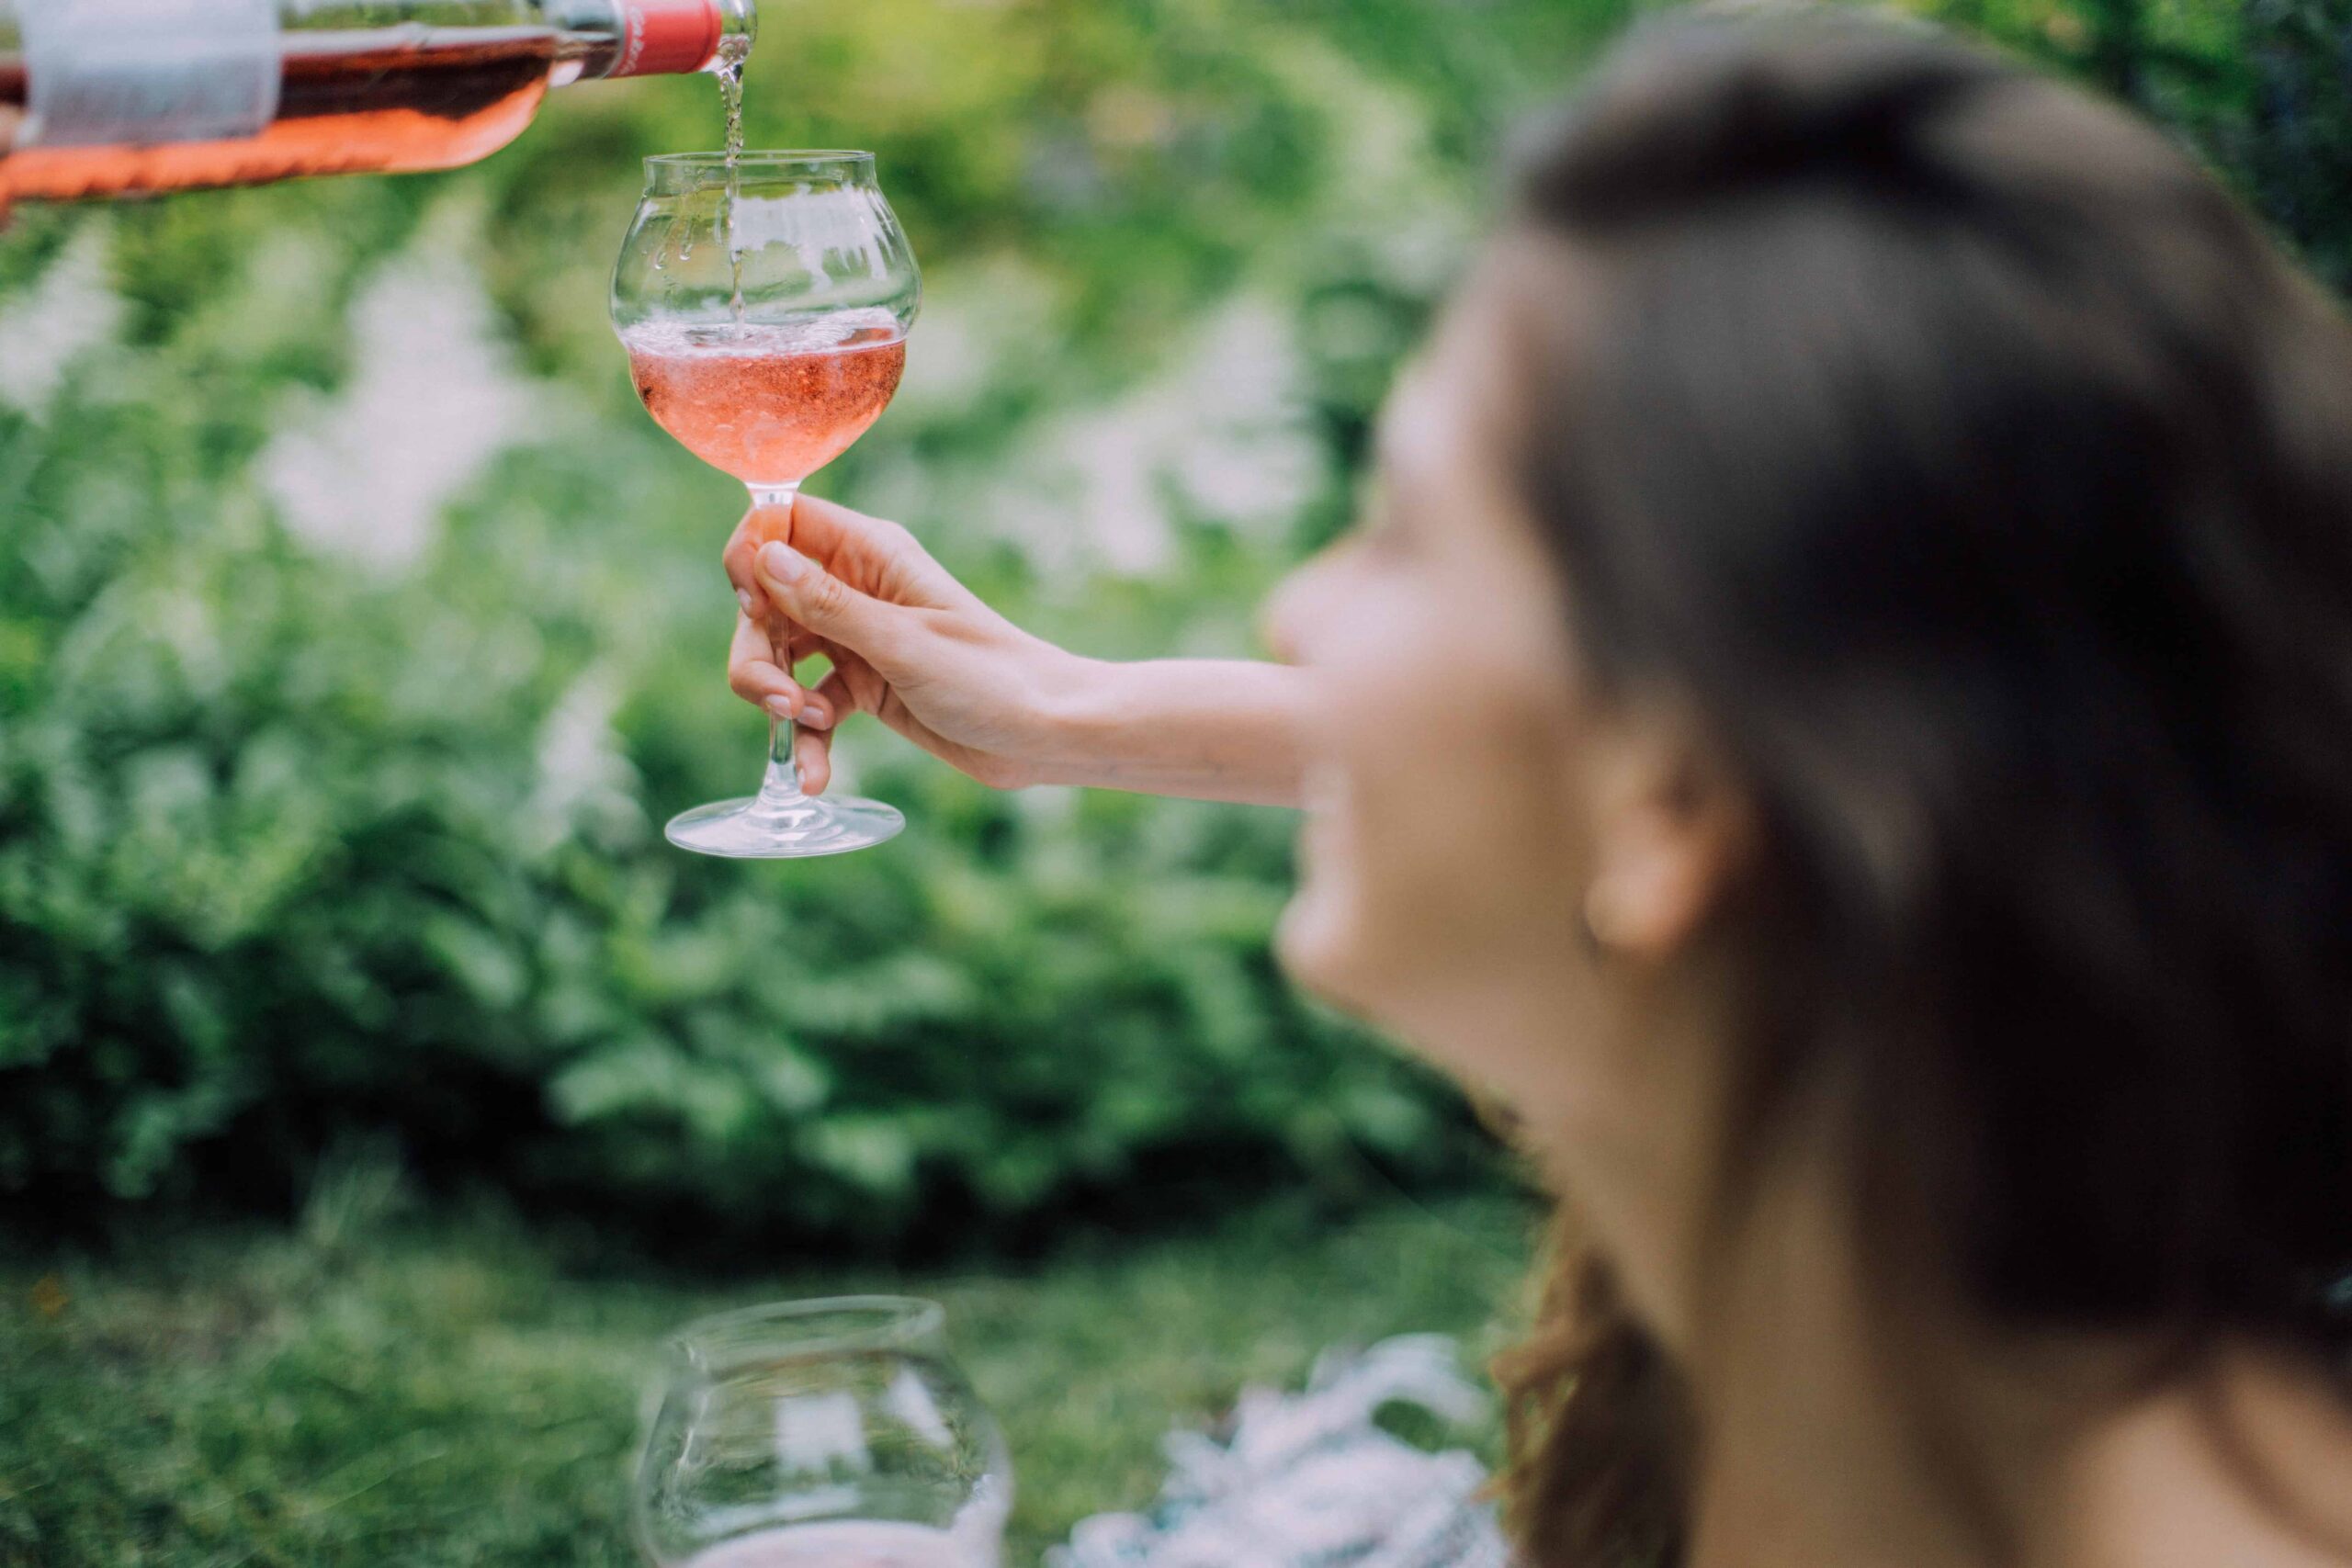 A person pouring a glass of wine for a friend who looks up at them